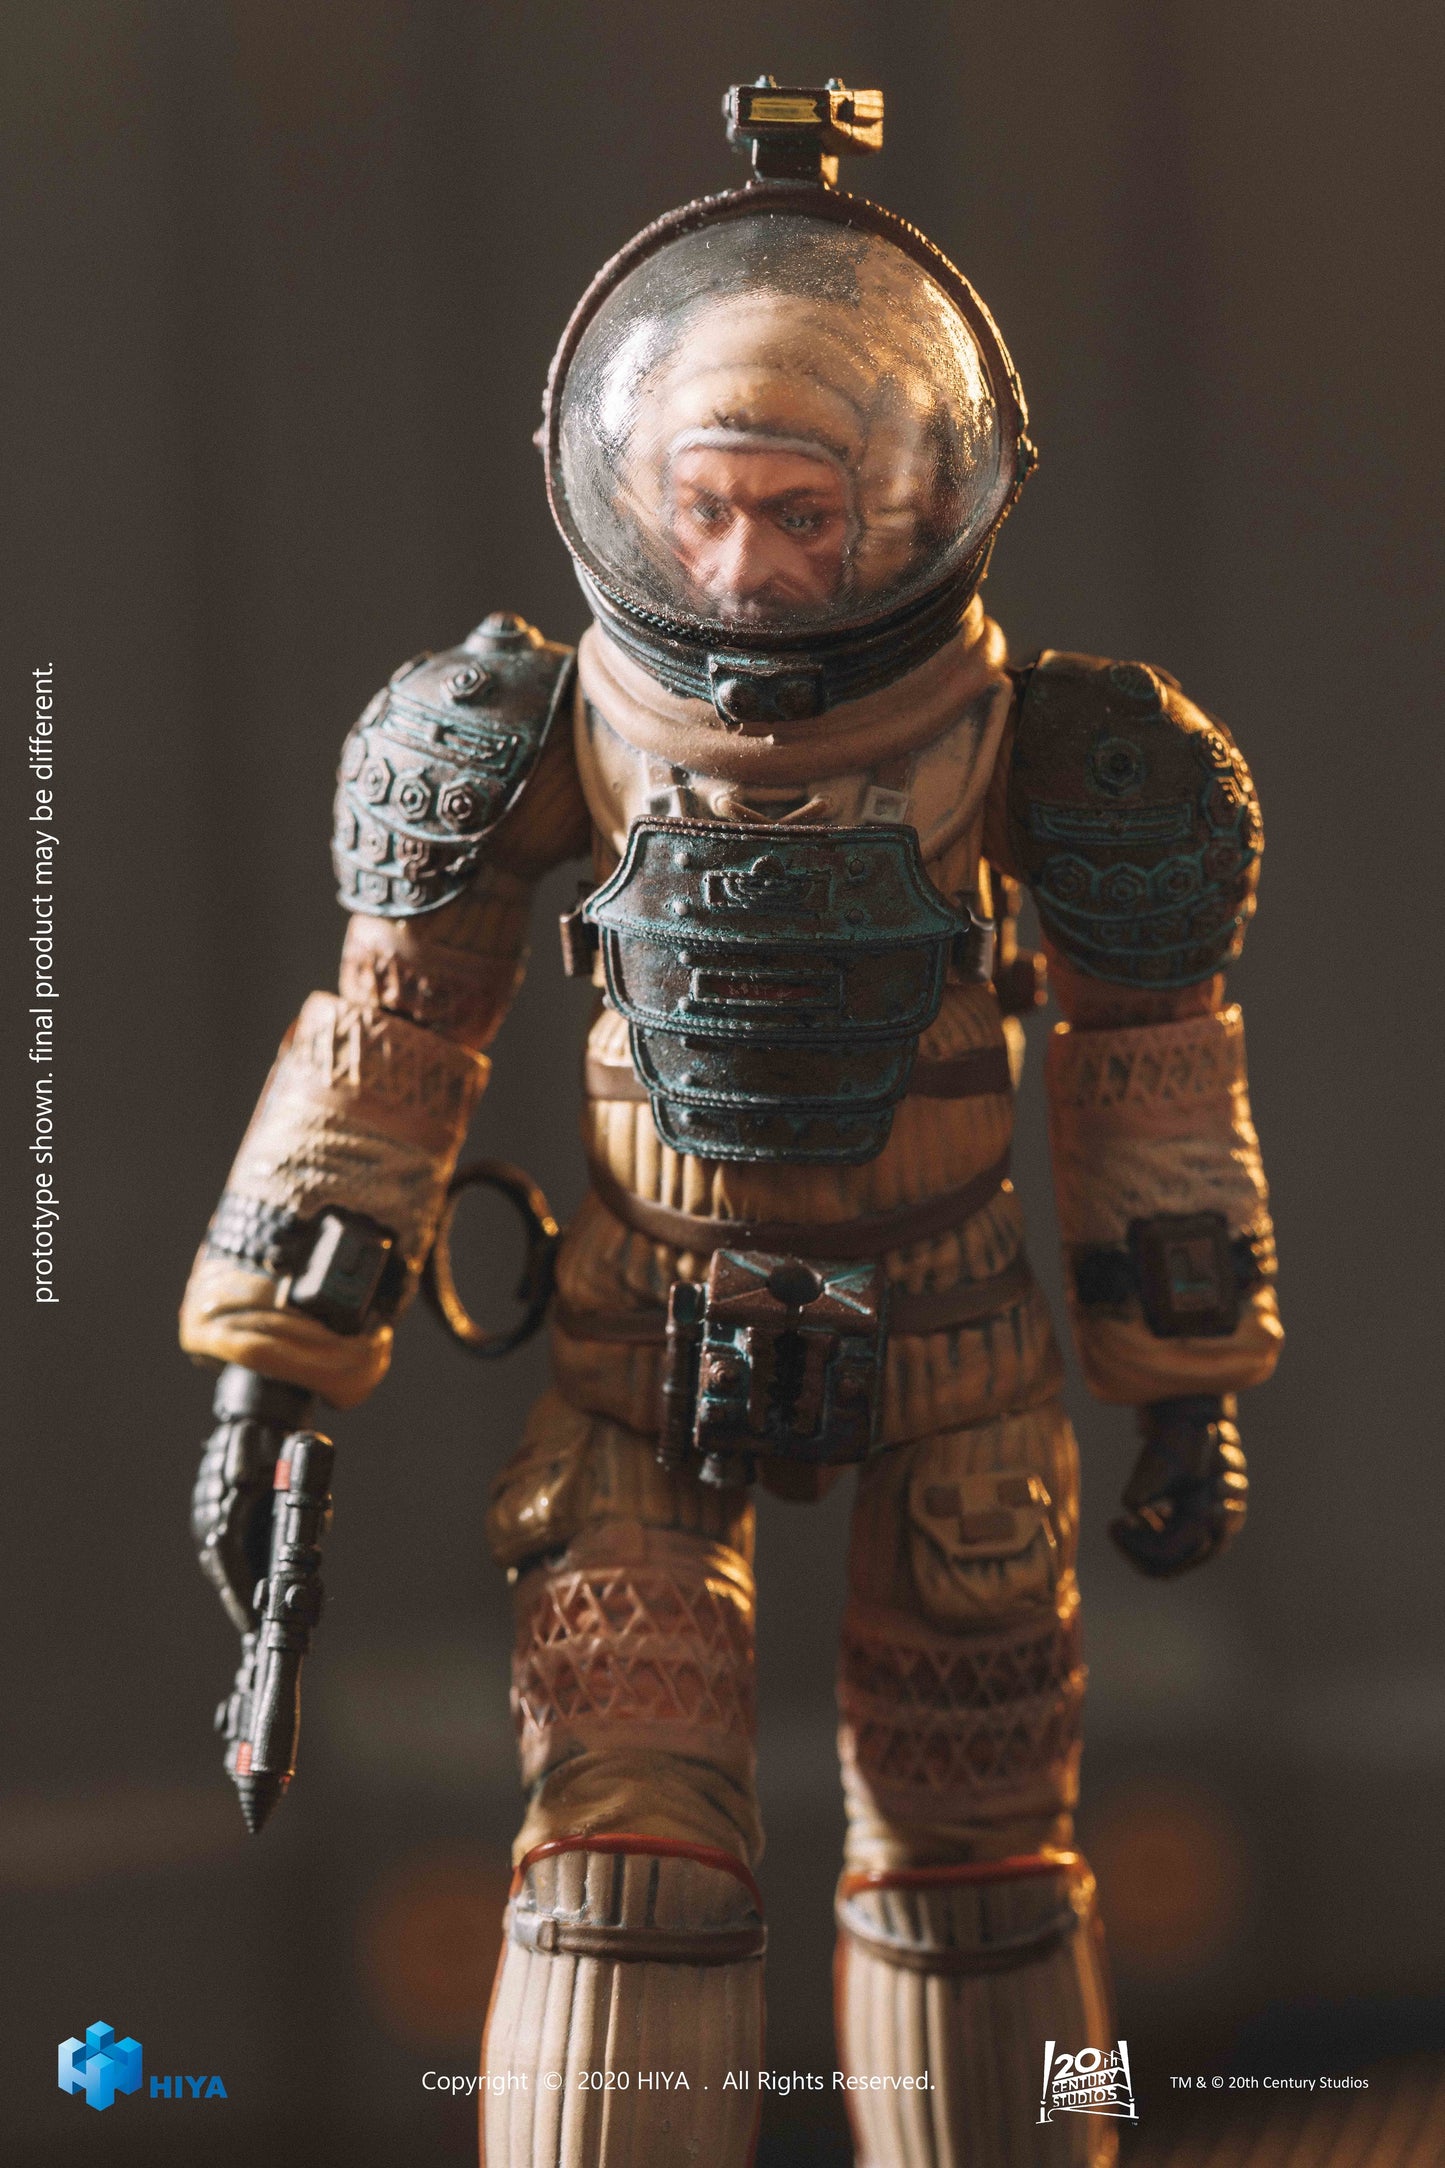 Alien Kane in Spacesuit 1:18 Scale Action Figure - Previews Exclusive